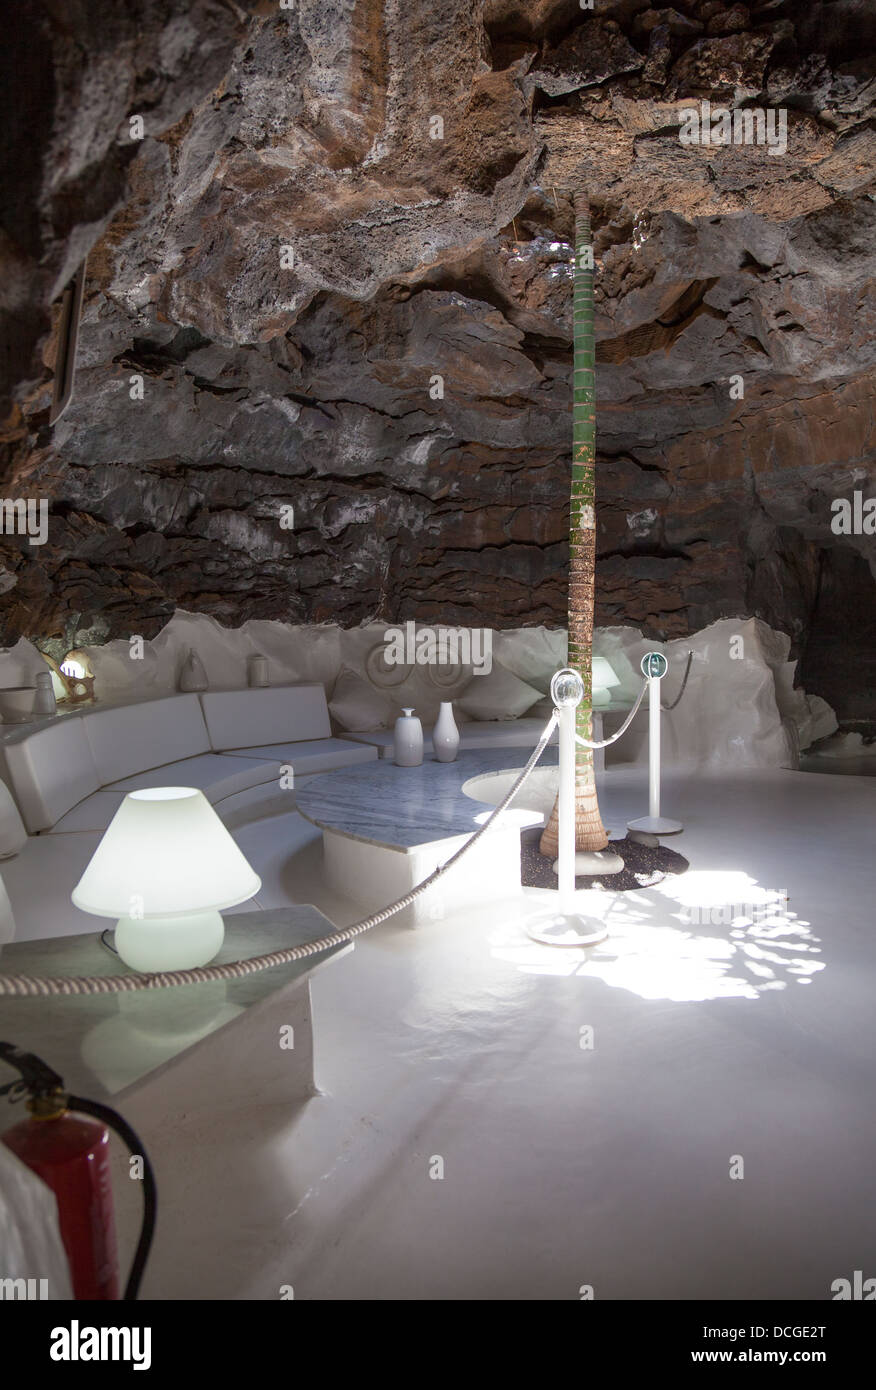 One of the living spaces created within the volcanic bubble at The César Manrique foundation, Lanzarote Stock Photo